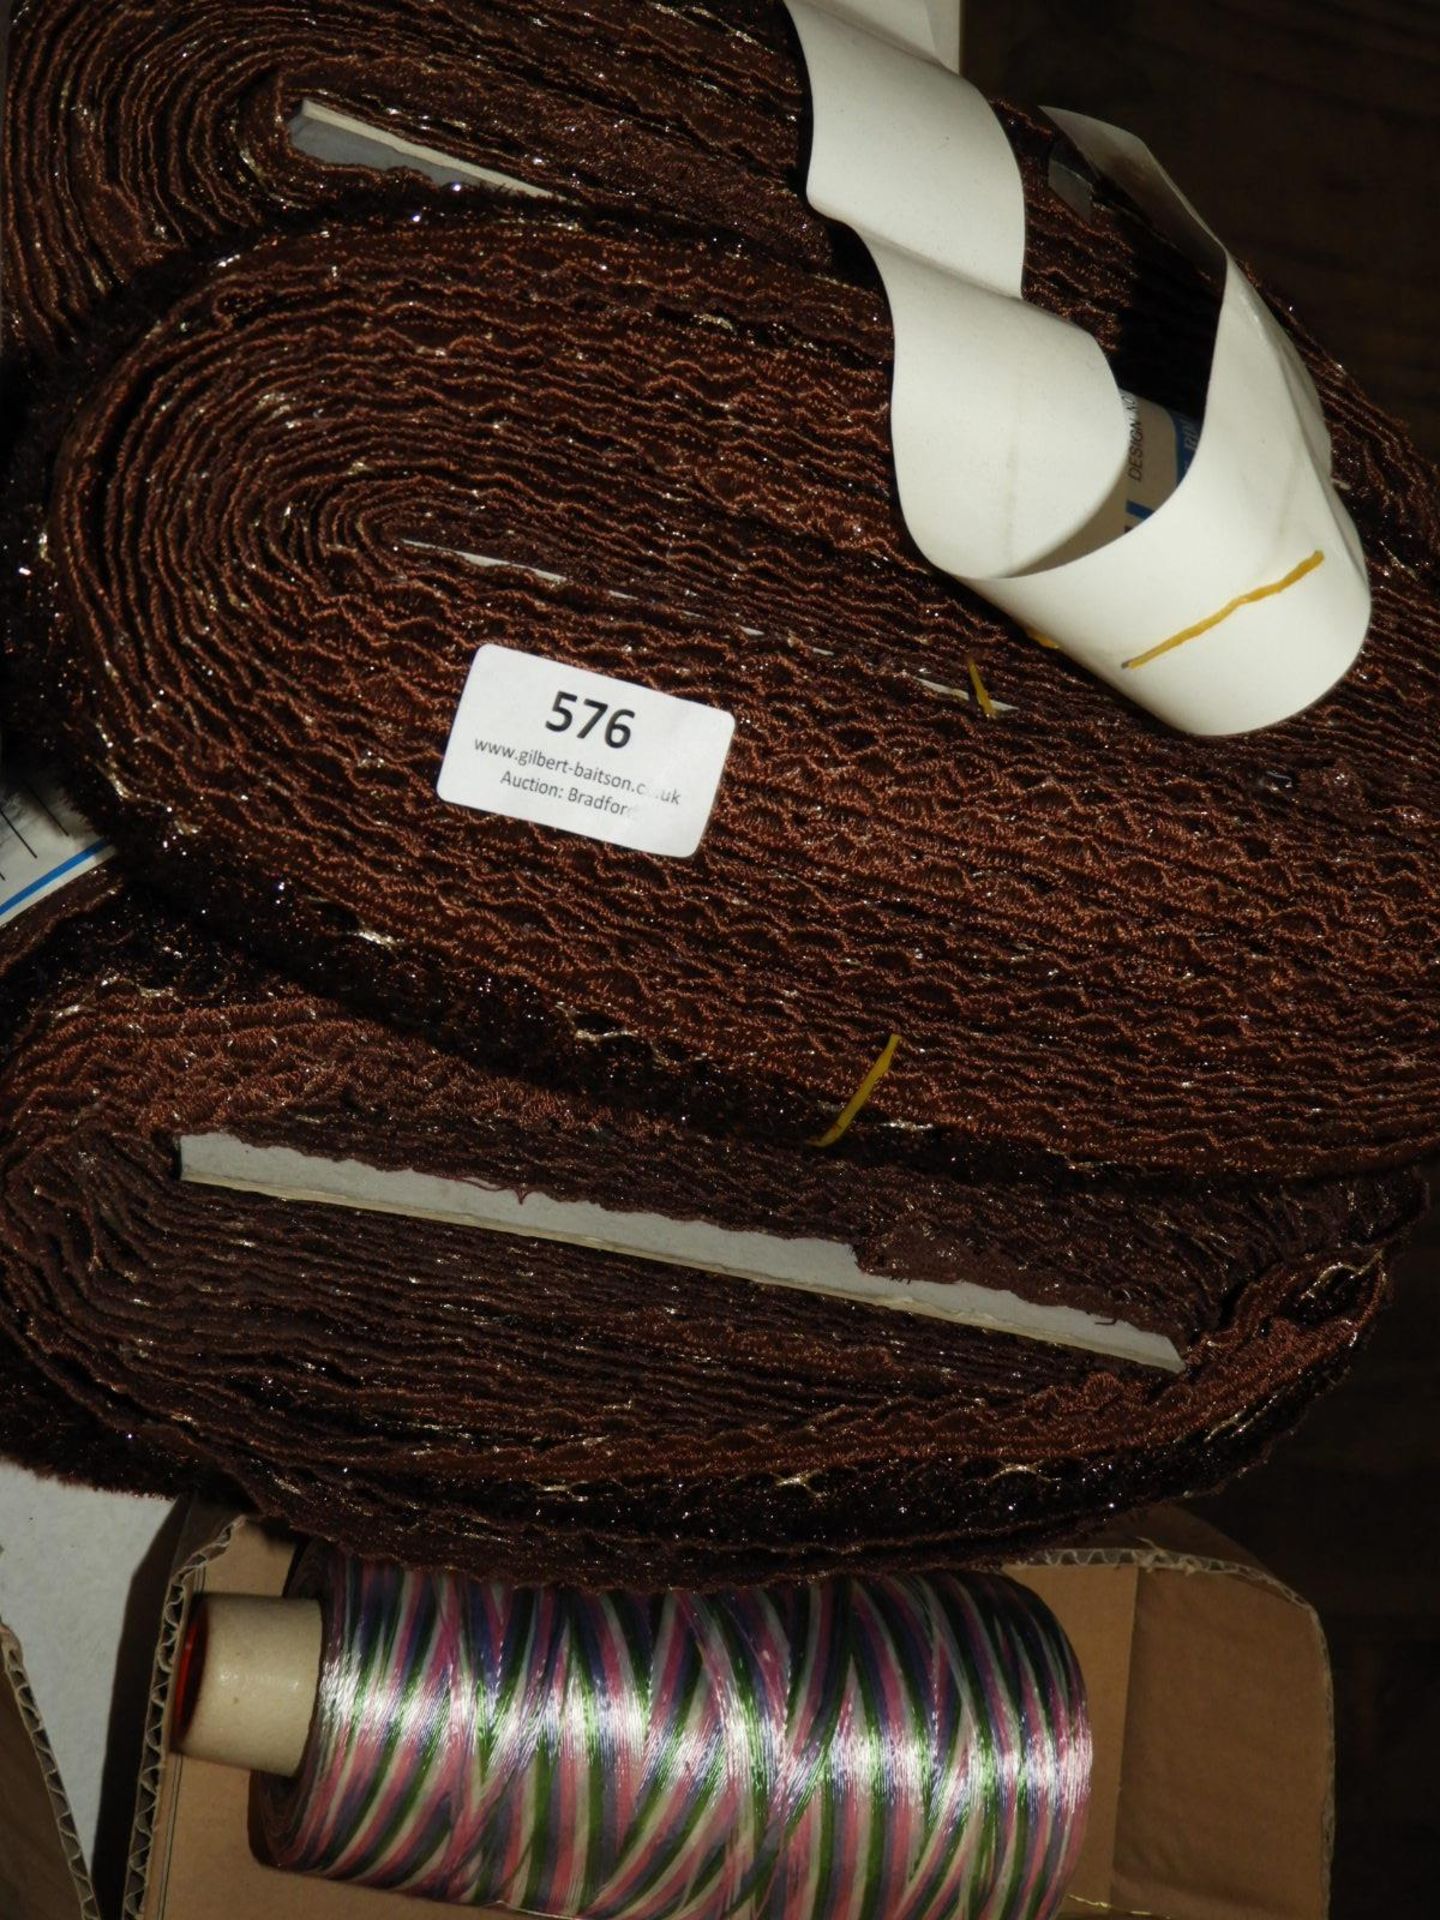 *Six Rolls of Brown Lace Edging